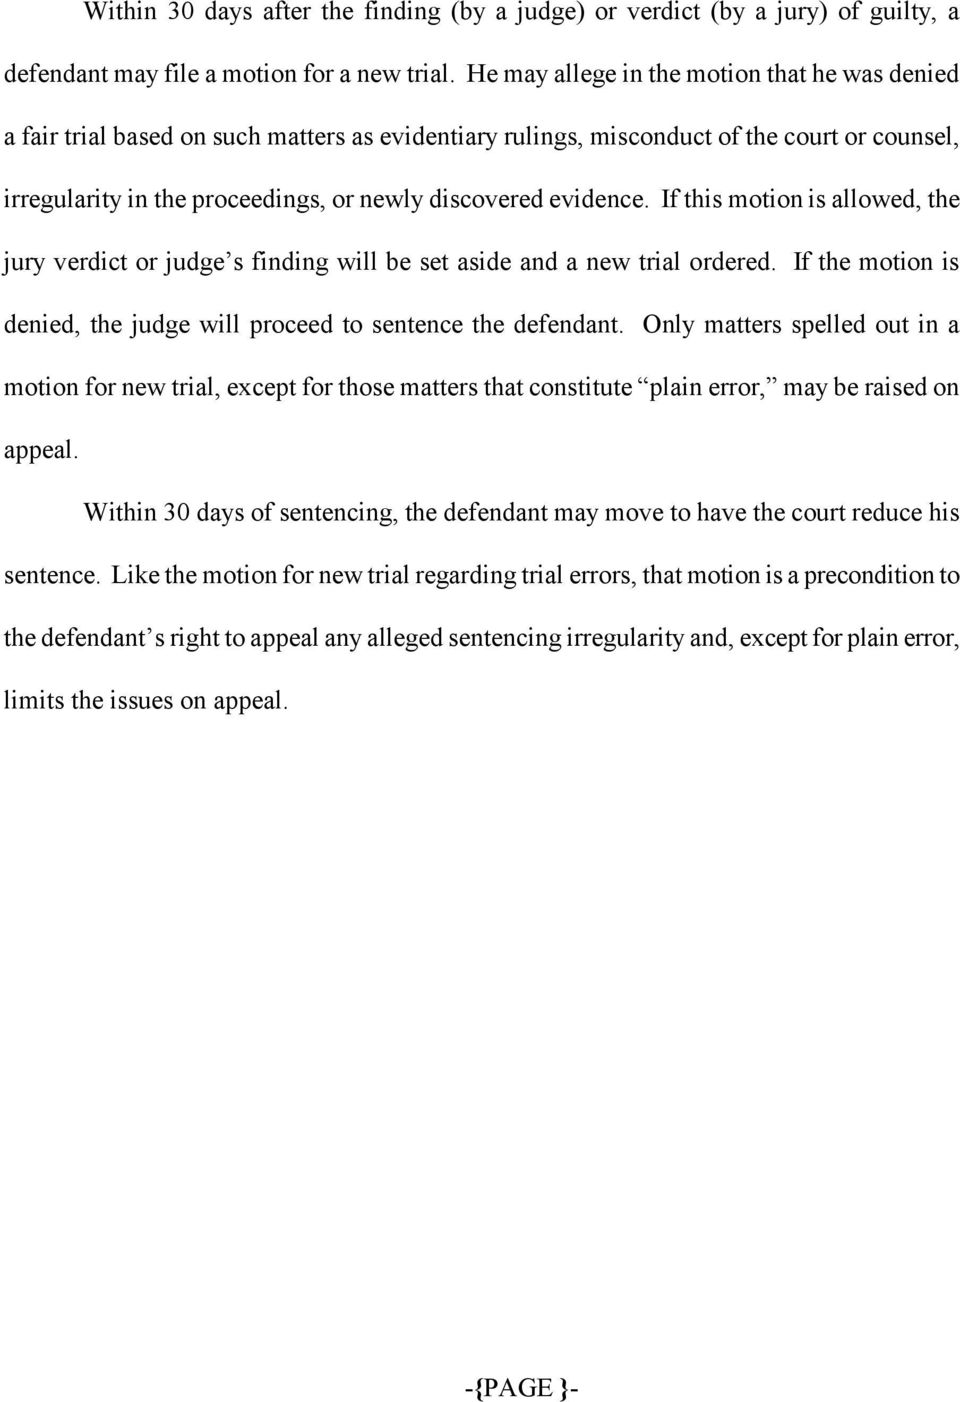 evidence. If this motion is allowed, the jury verdict or judge s finding will be set aside and a new trial ordered. If the motion is denied, the judge will proceed to sentence the defendant.